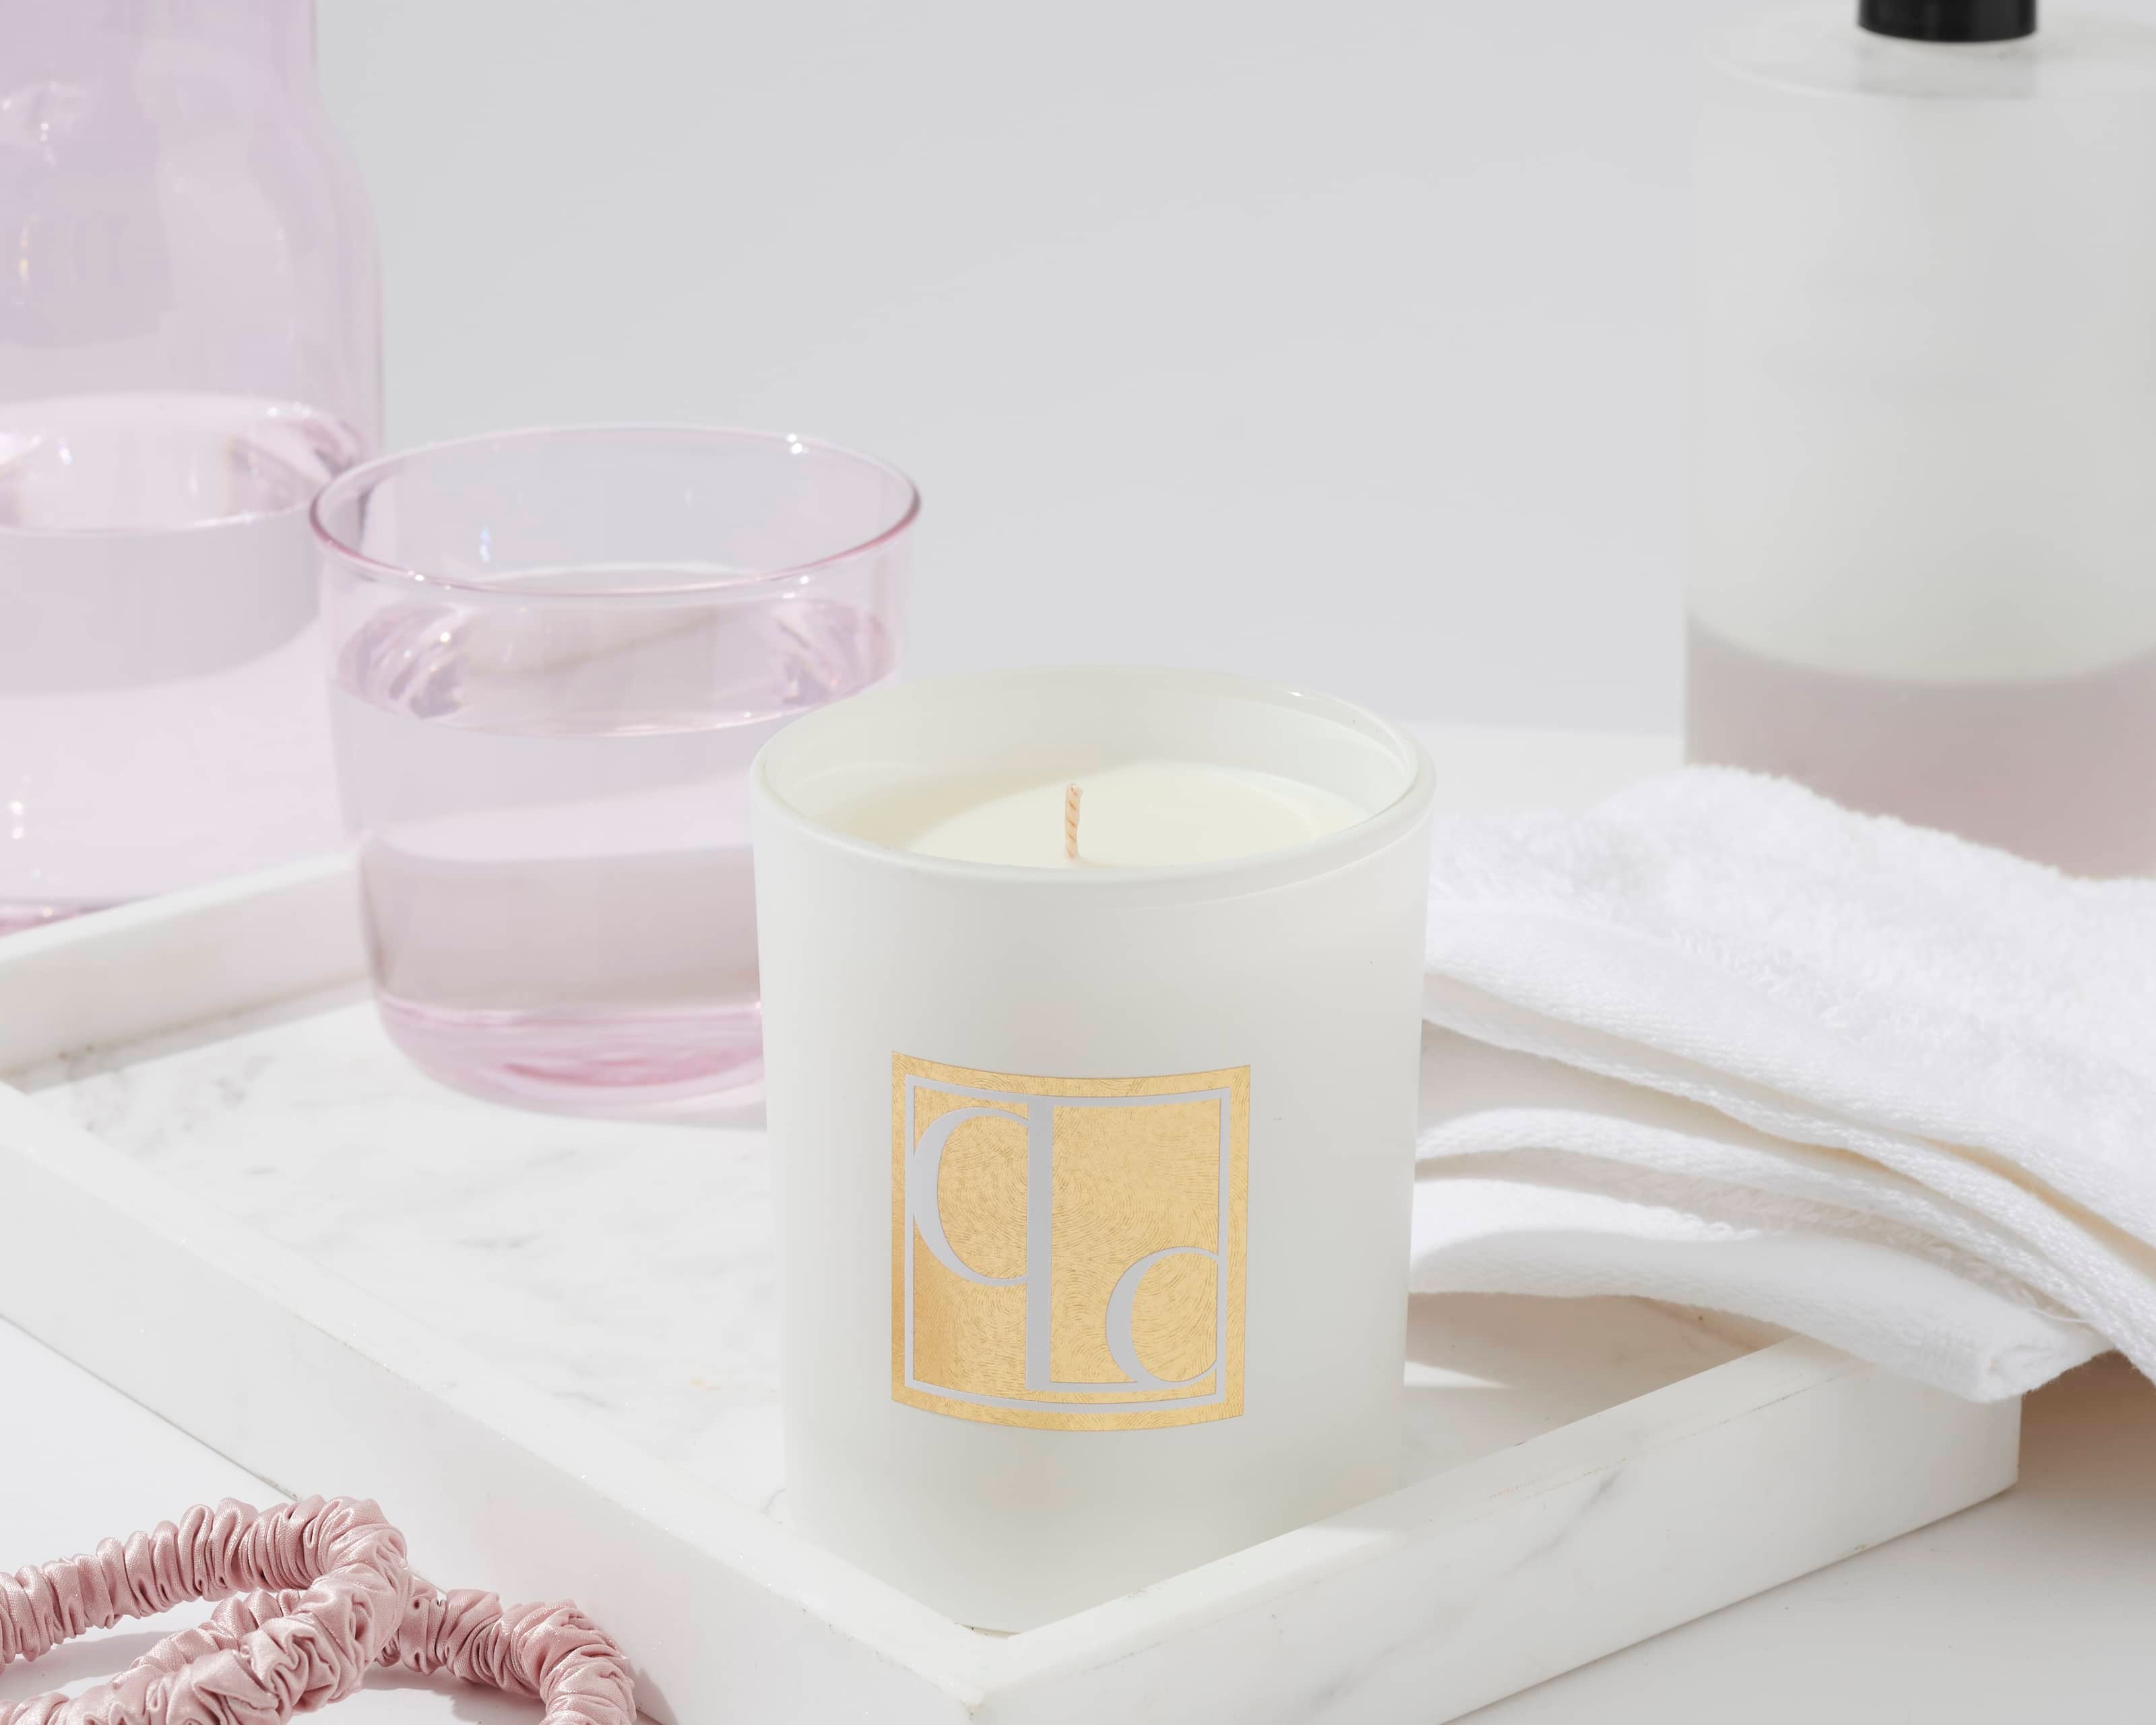 Caitlin Louise Collection Japanese Honeysuckle scented candle on a tray surrounded by light pink scrunchies, hand towel, pink glass filled with water and hand pump - bathroom scene.